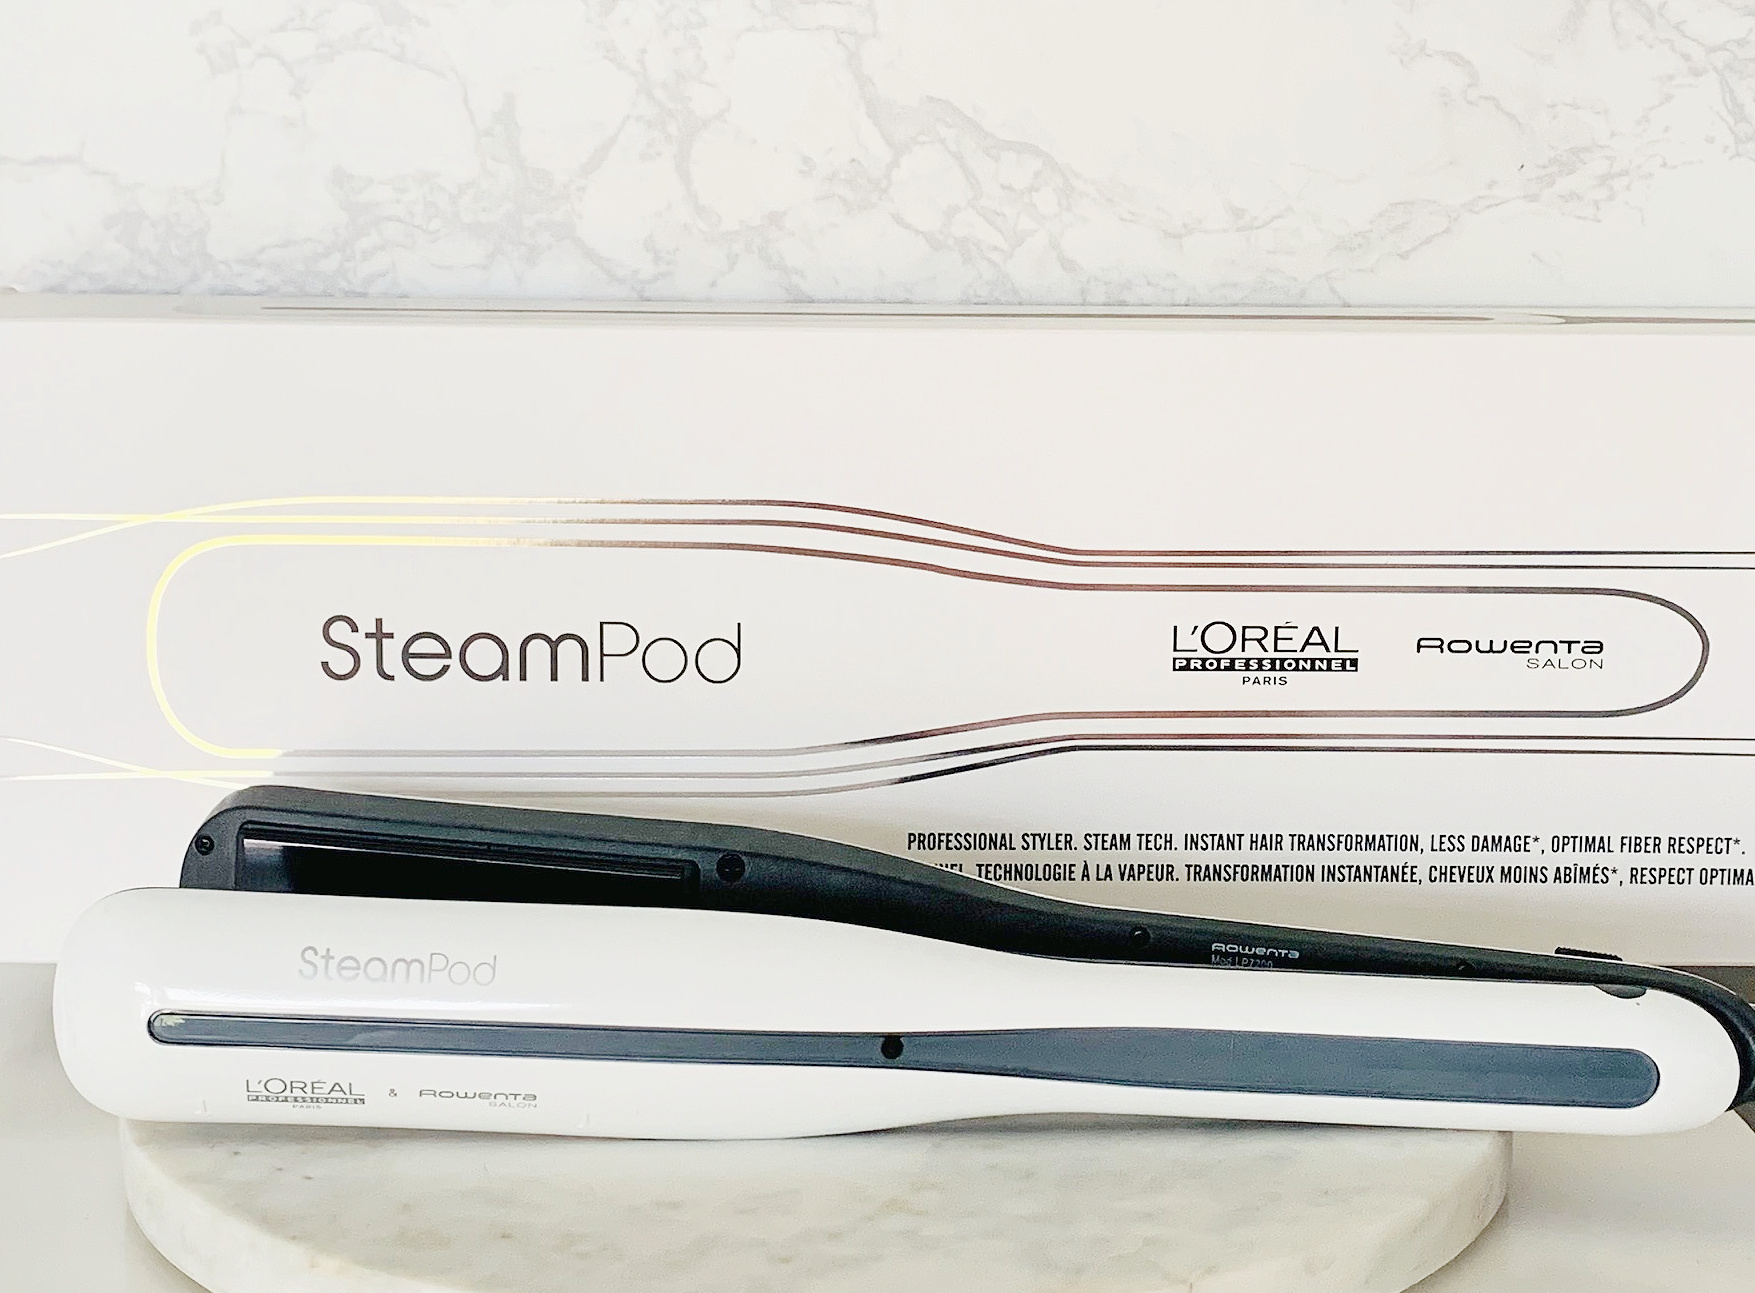 L'Oreal Steampod 3.0 review - worth the hype/price?